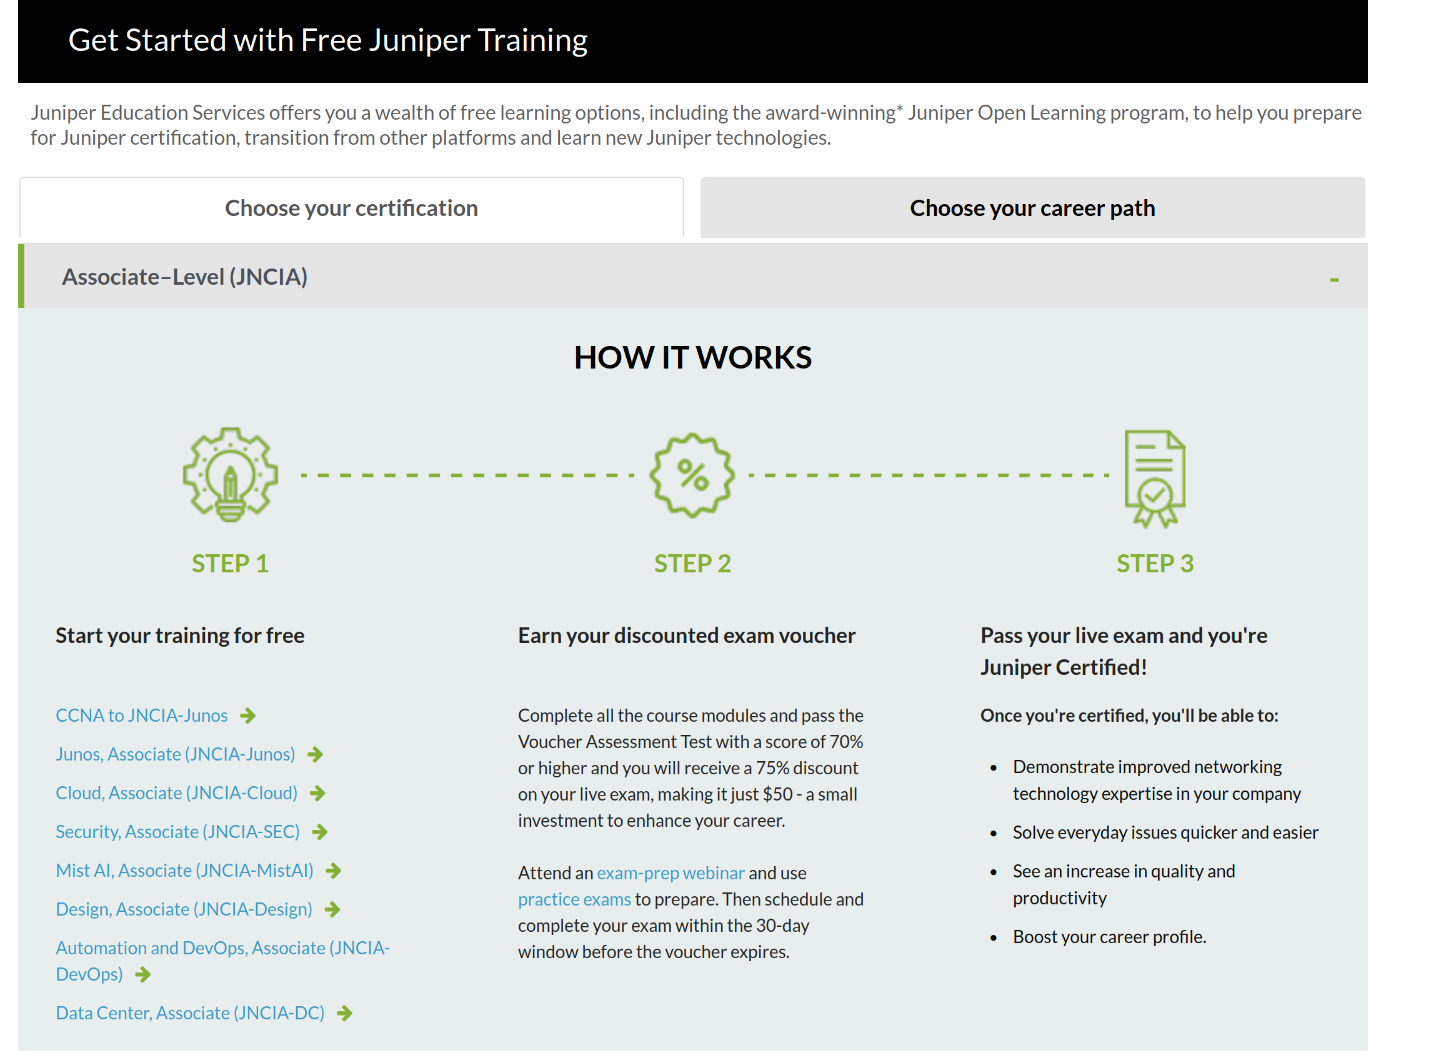 An image showing the details of the free/discounted training for Juniper Network Certifications